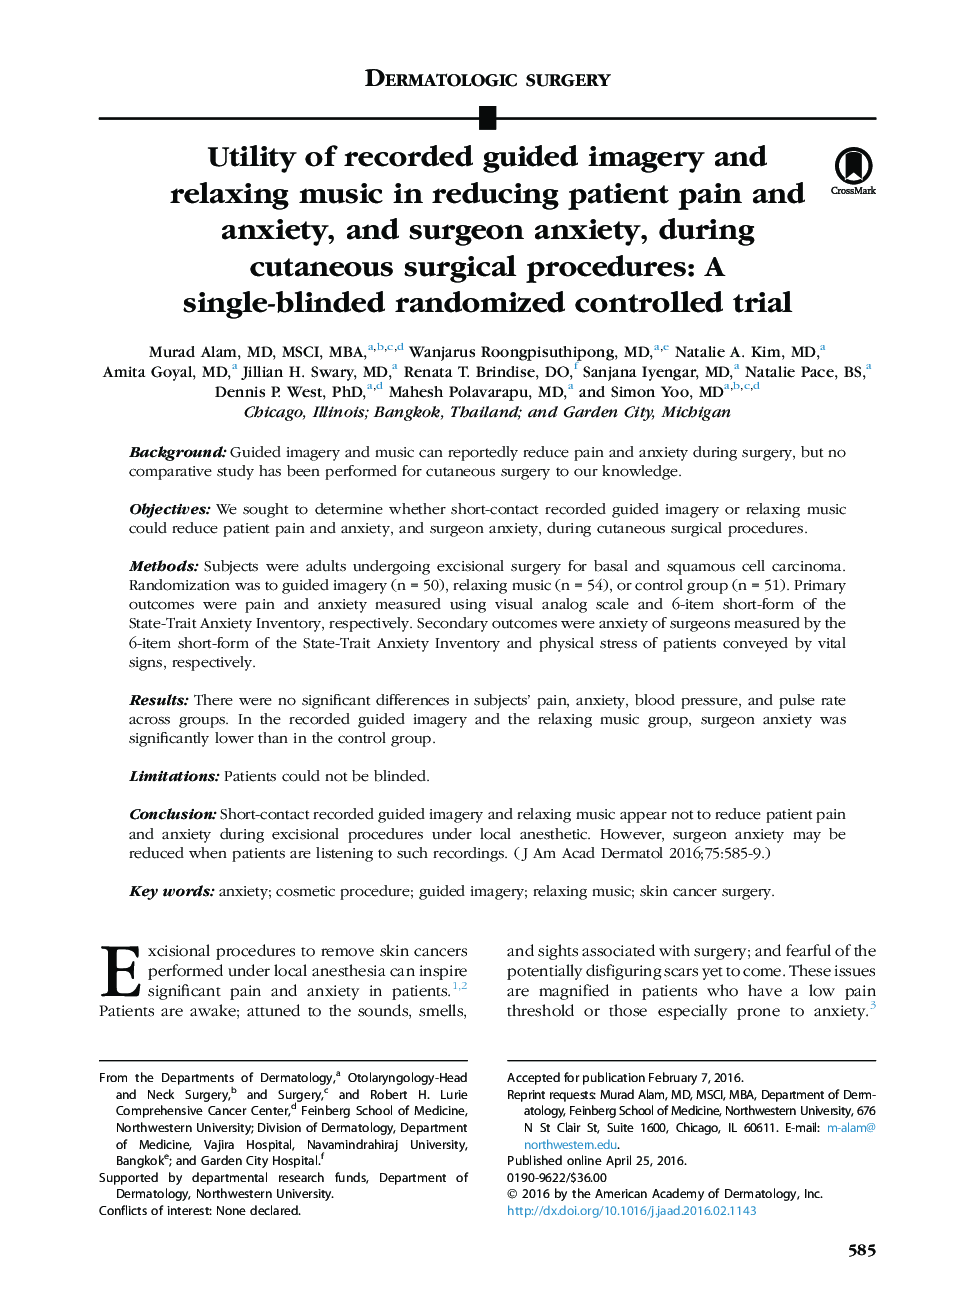 Dermatologic surgeryUtility of recorded guided imagery and relaxing music in reducing patient pain and anxiety, and surgeon anxiety, during cutaneous surgical procedures: A single-blinded randomized controlled trial